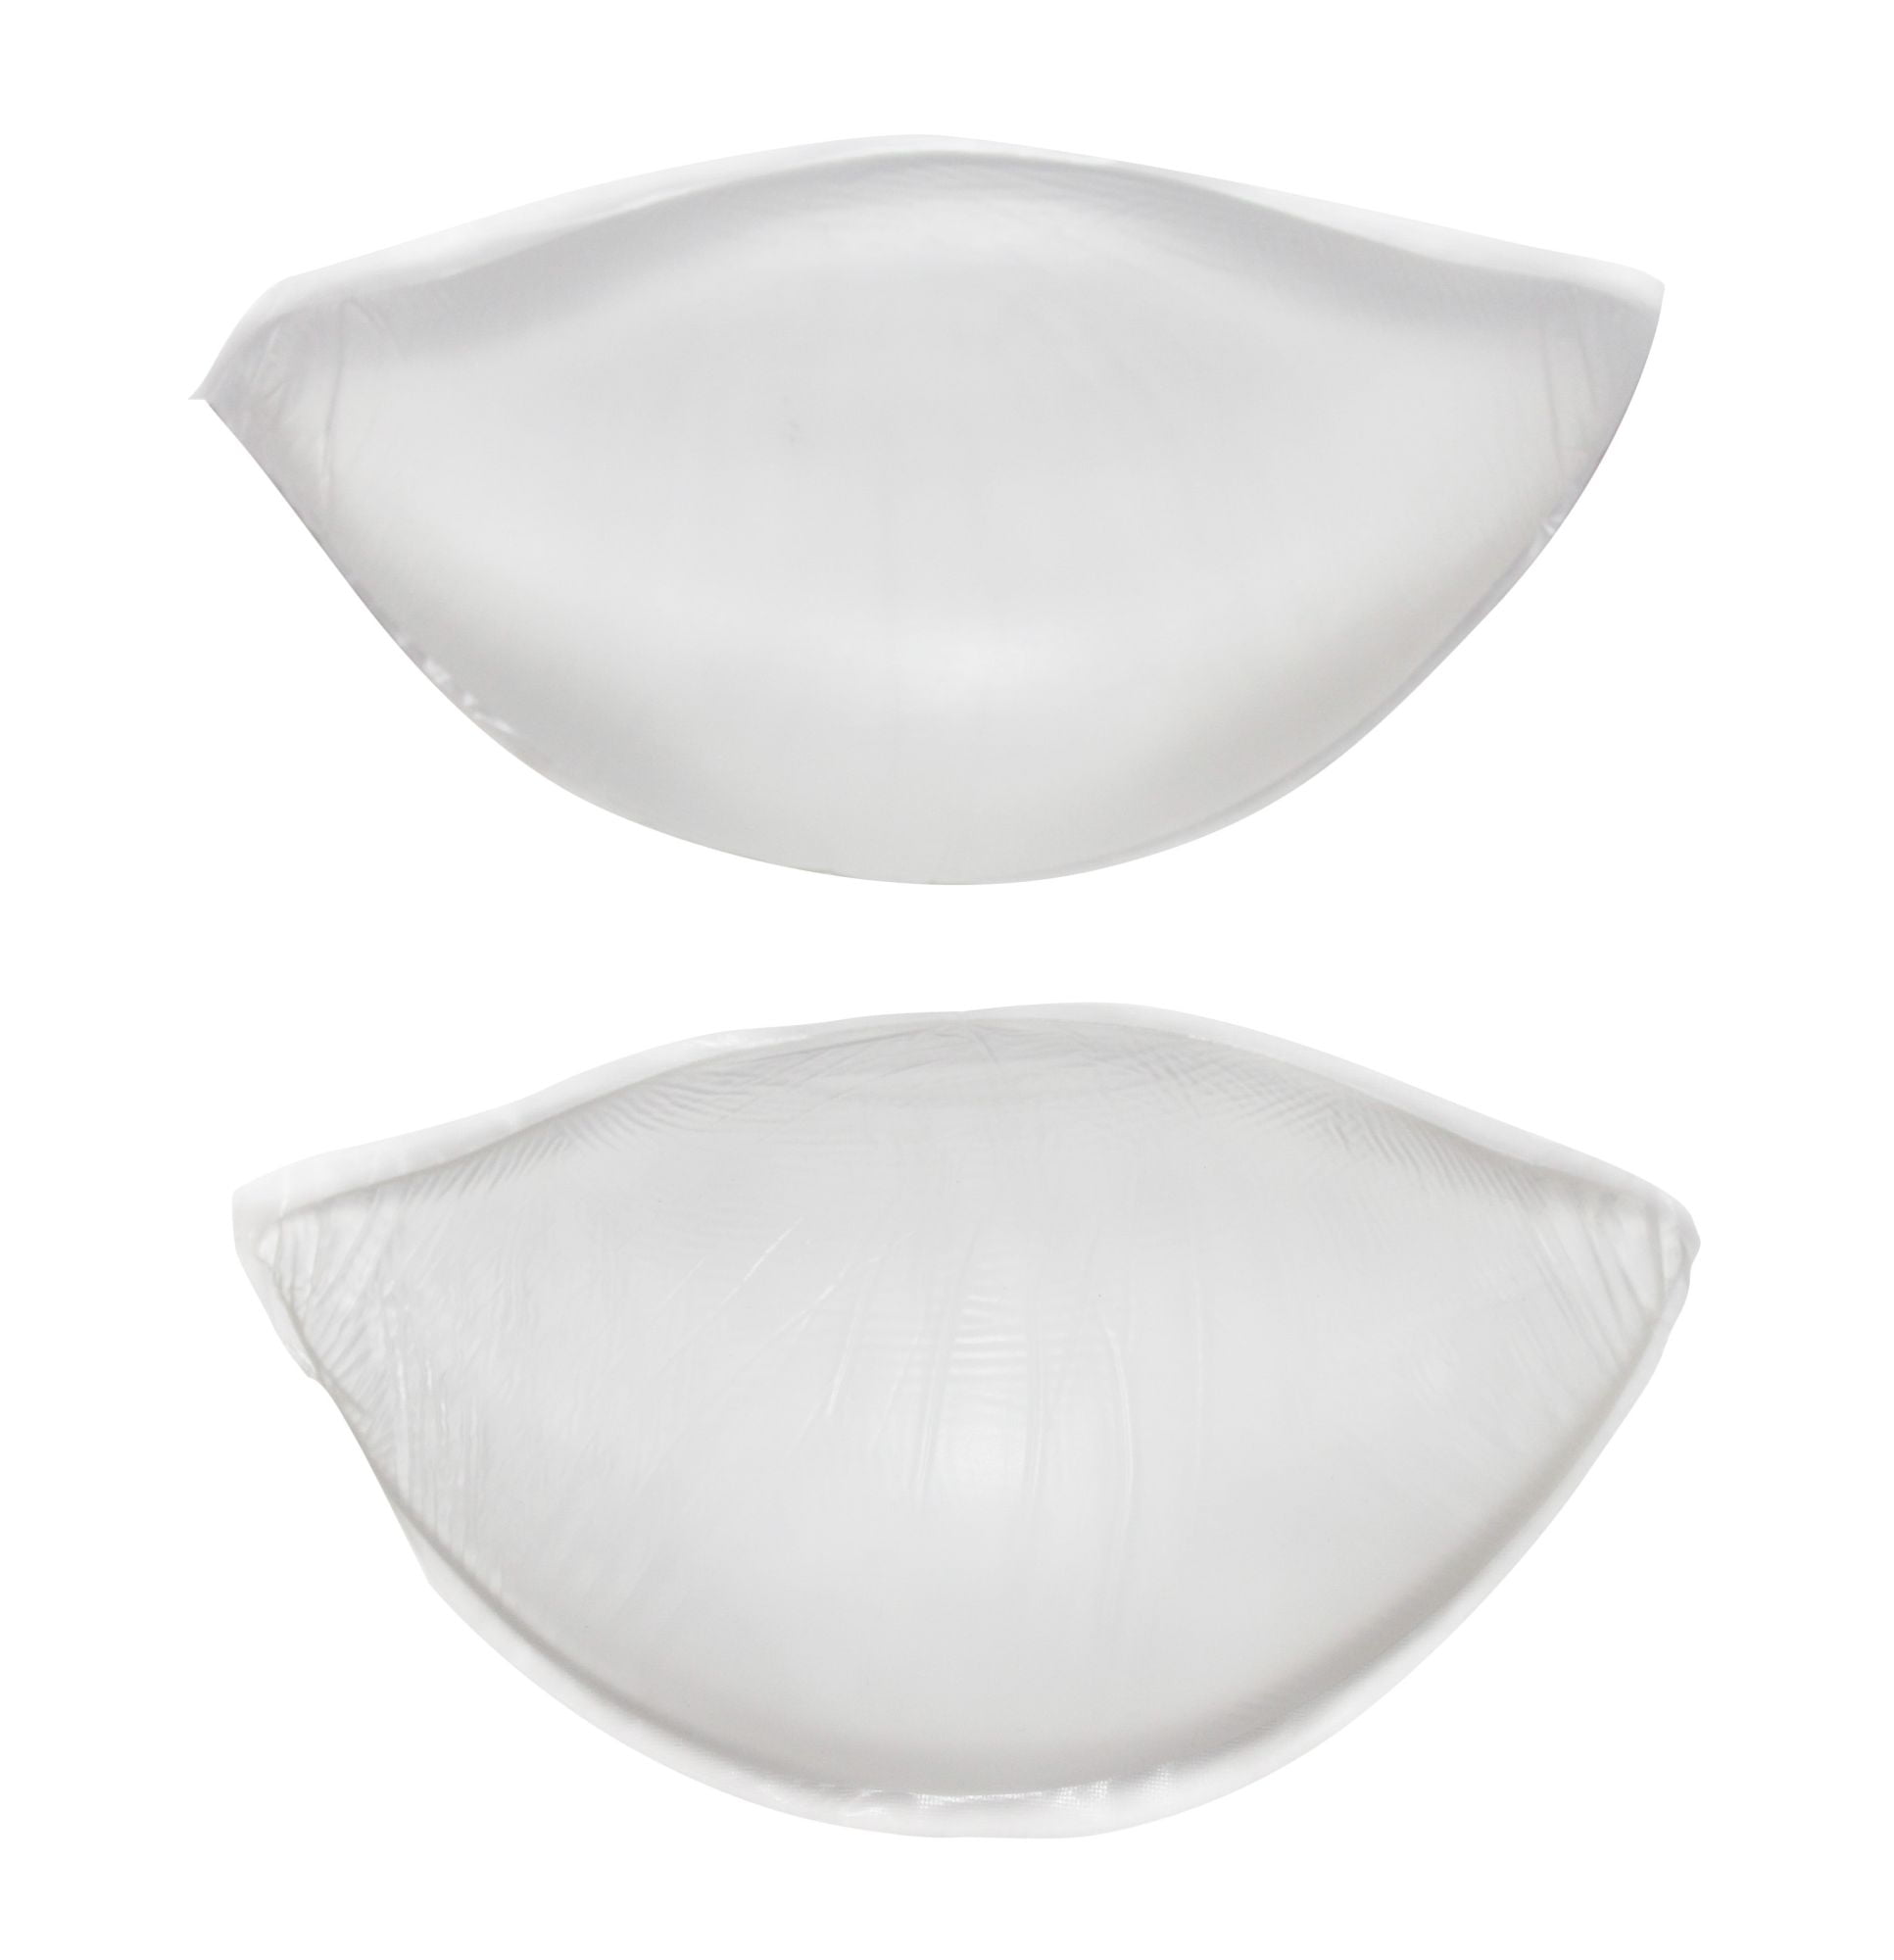 Silicone Bra Inserts, Gel Breast Pads And Breast Enhancers To Add 2 Cup,  Suitable For Bras/dresses/swimsuits-ksize